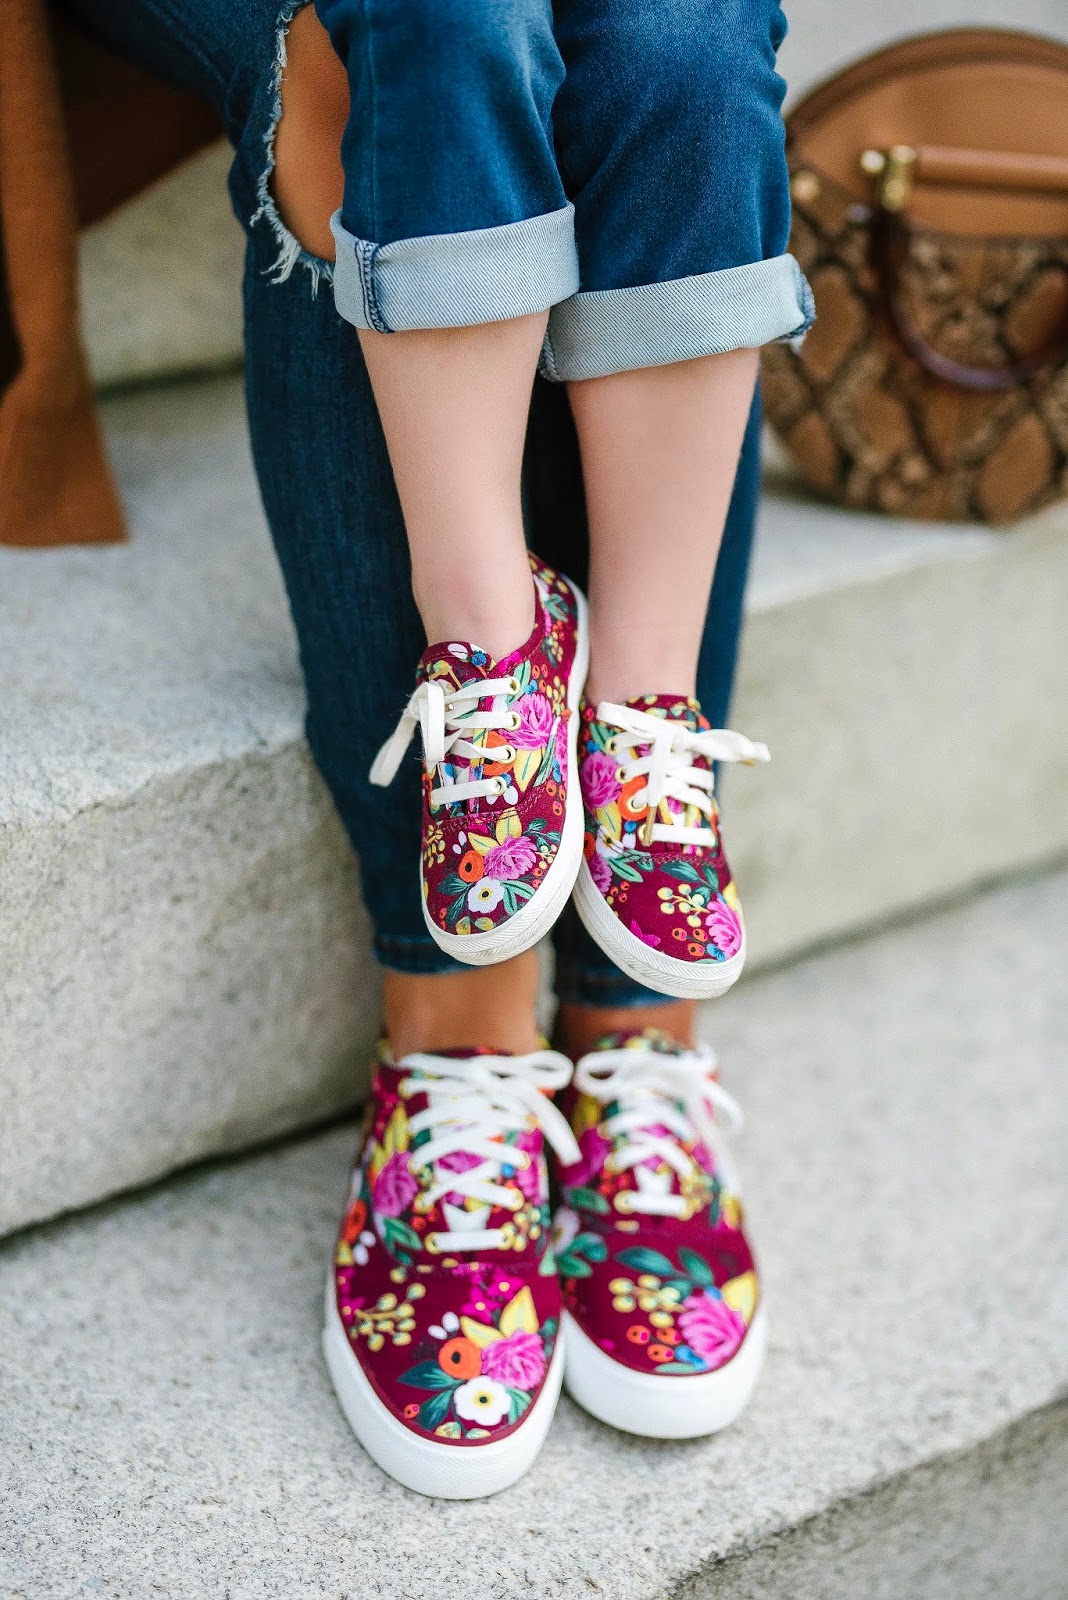 Mommy & Me Style: Twinning in Keds x Rifle Paper Co. Sneakers - Something Delightful Blog